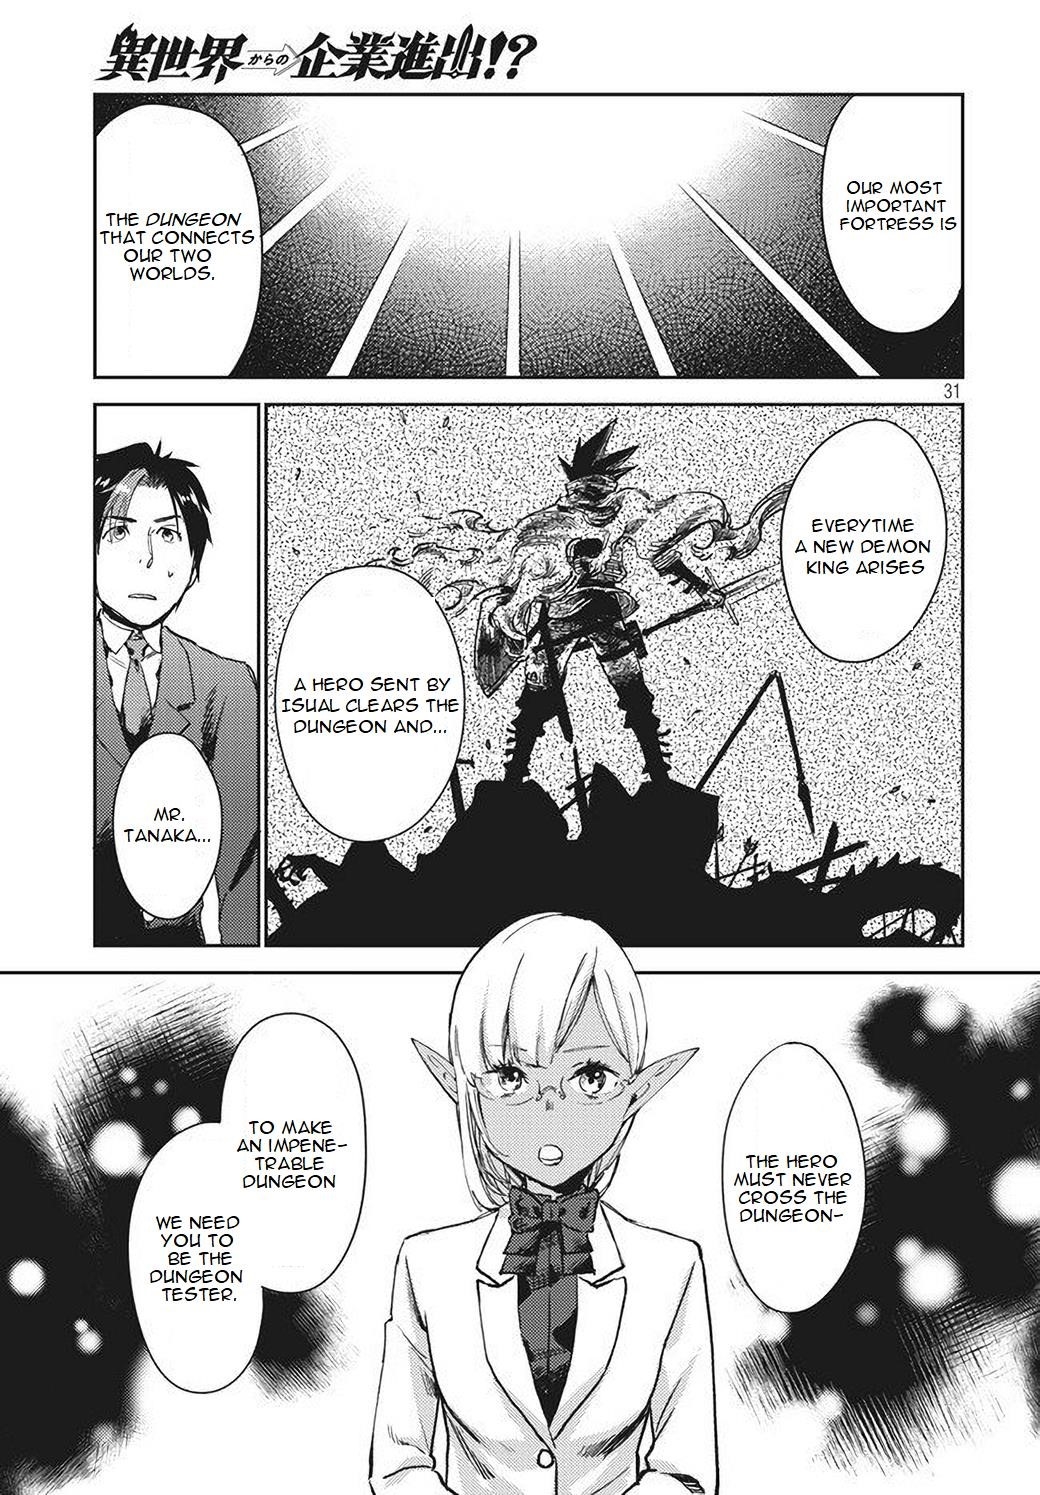 Read Manga Starting a Business in Another World?! - Chapter 1.2